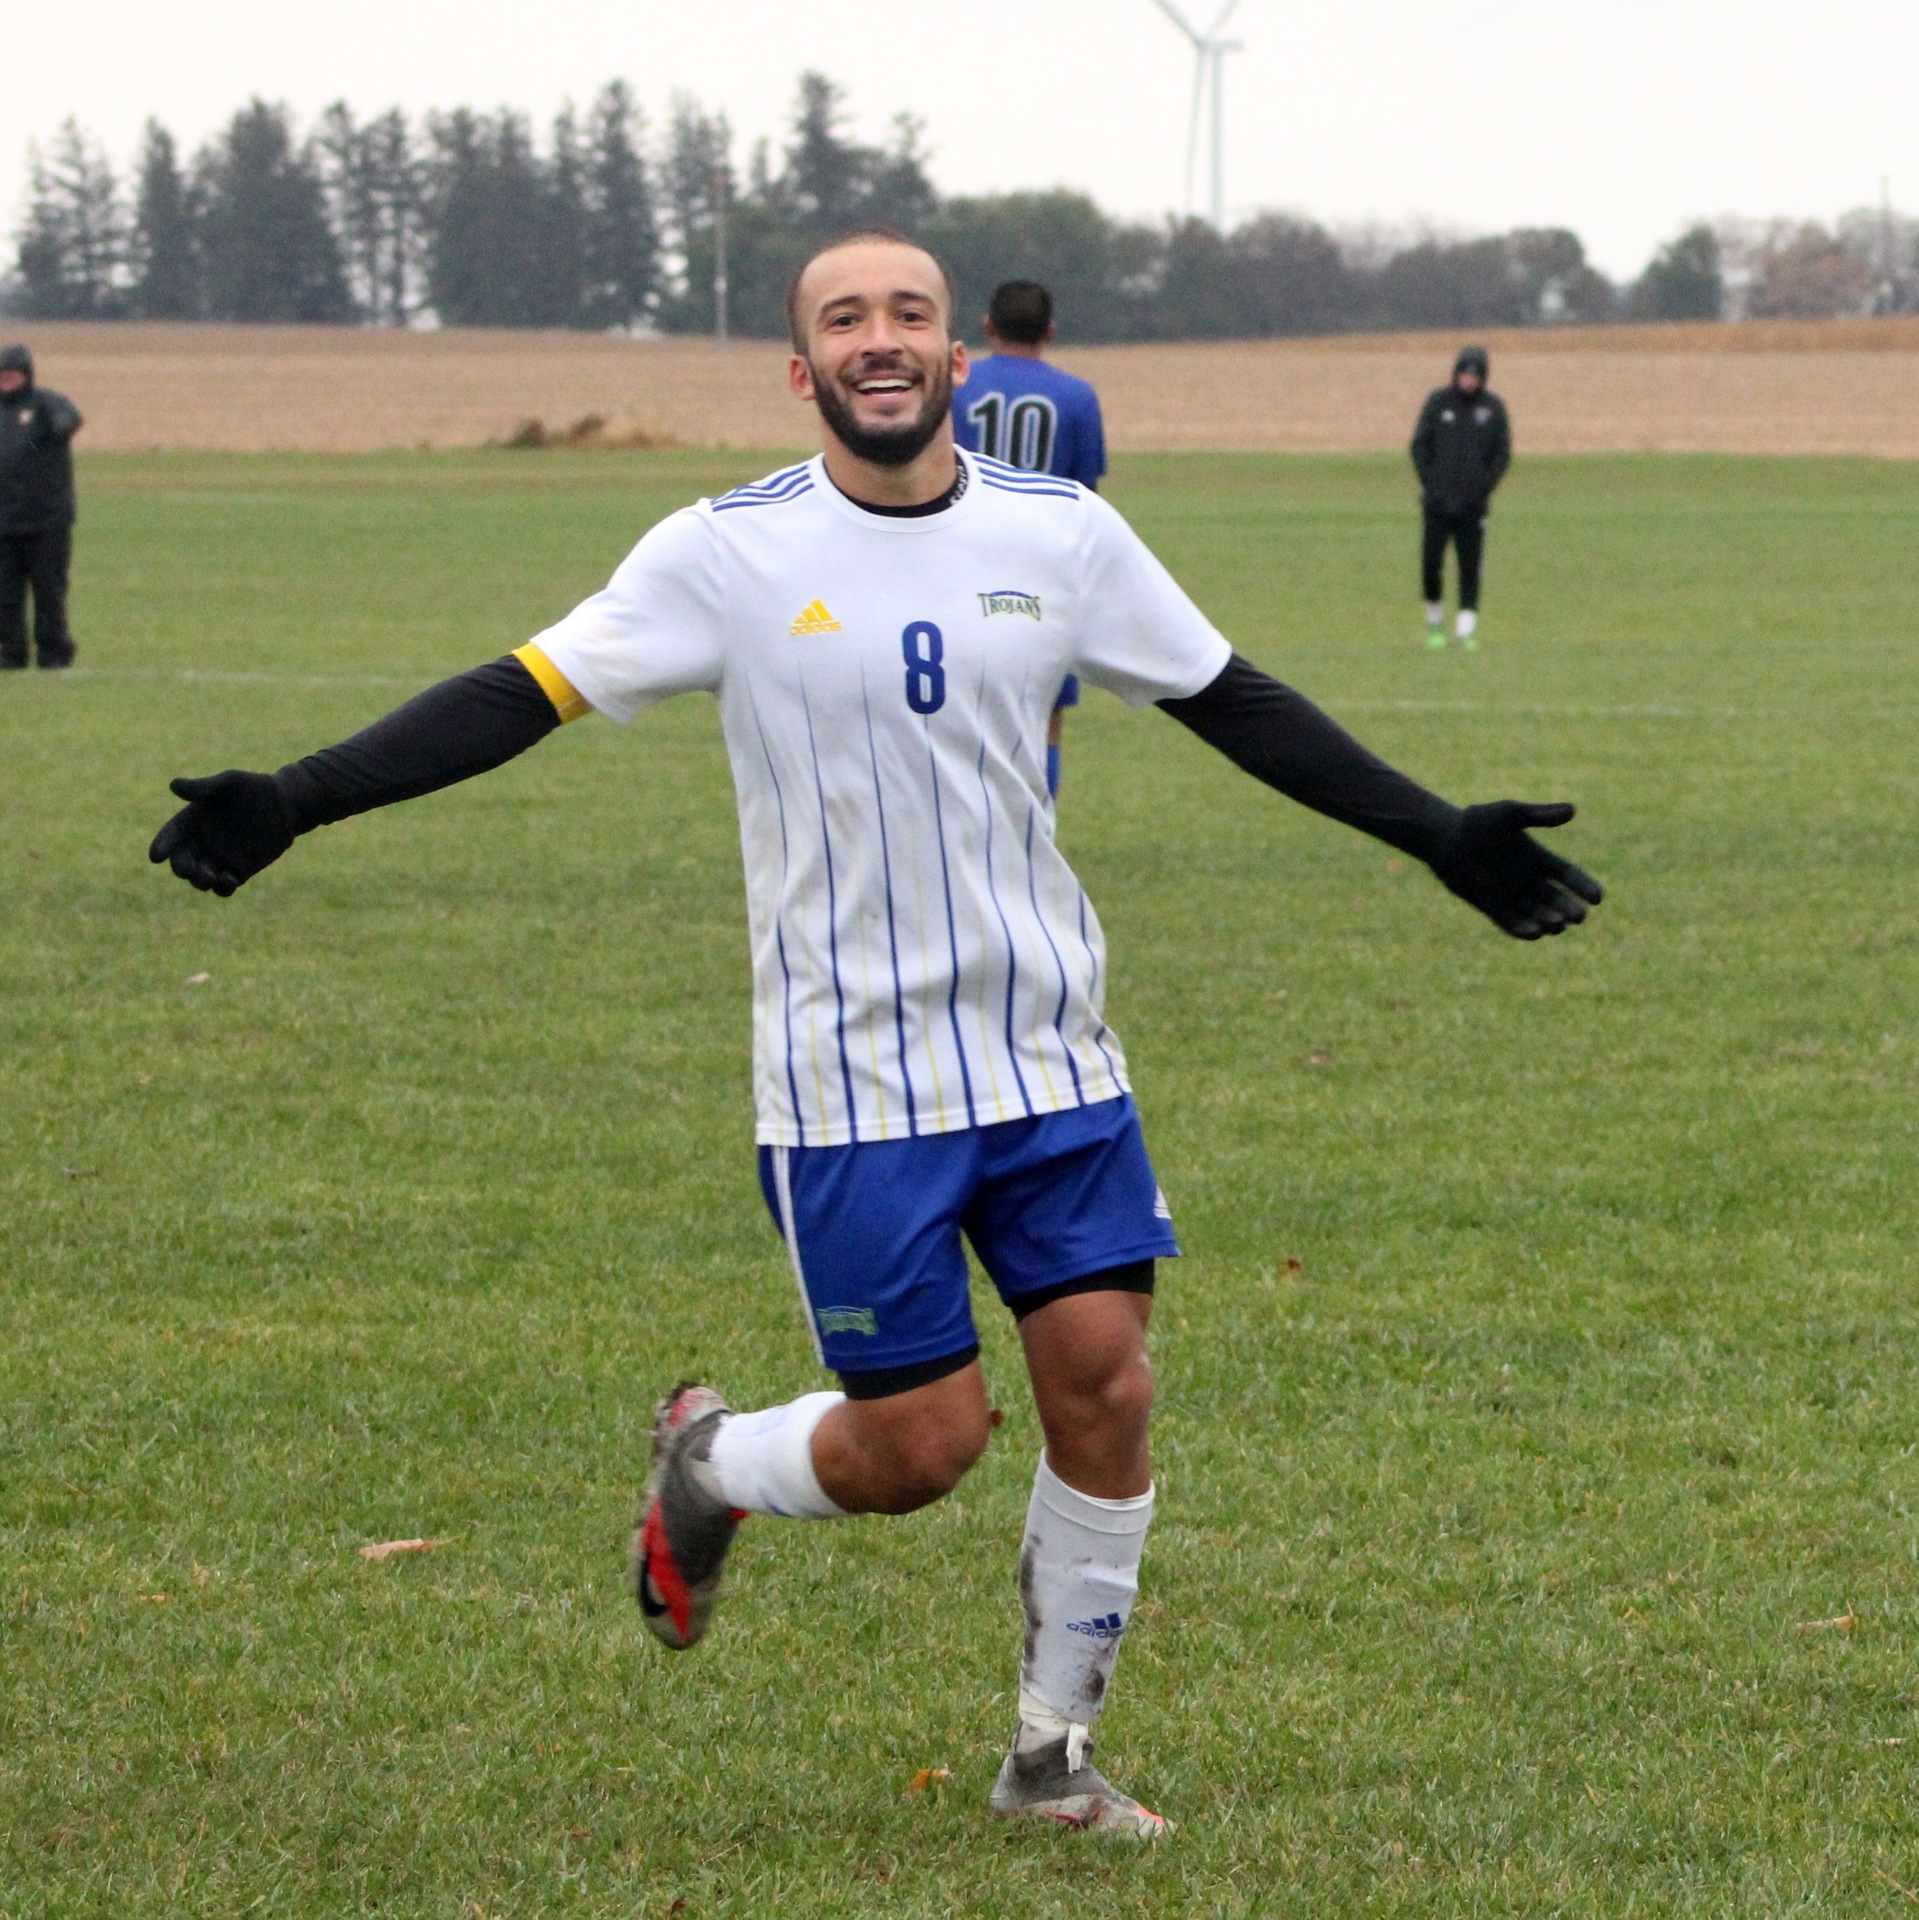 NIACC's Giovani Soares celebrates a goal in Sunday's regional tournament win over DCTC.